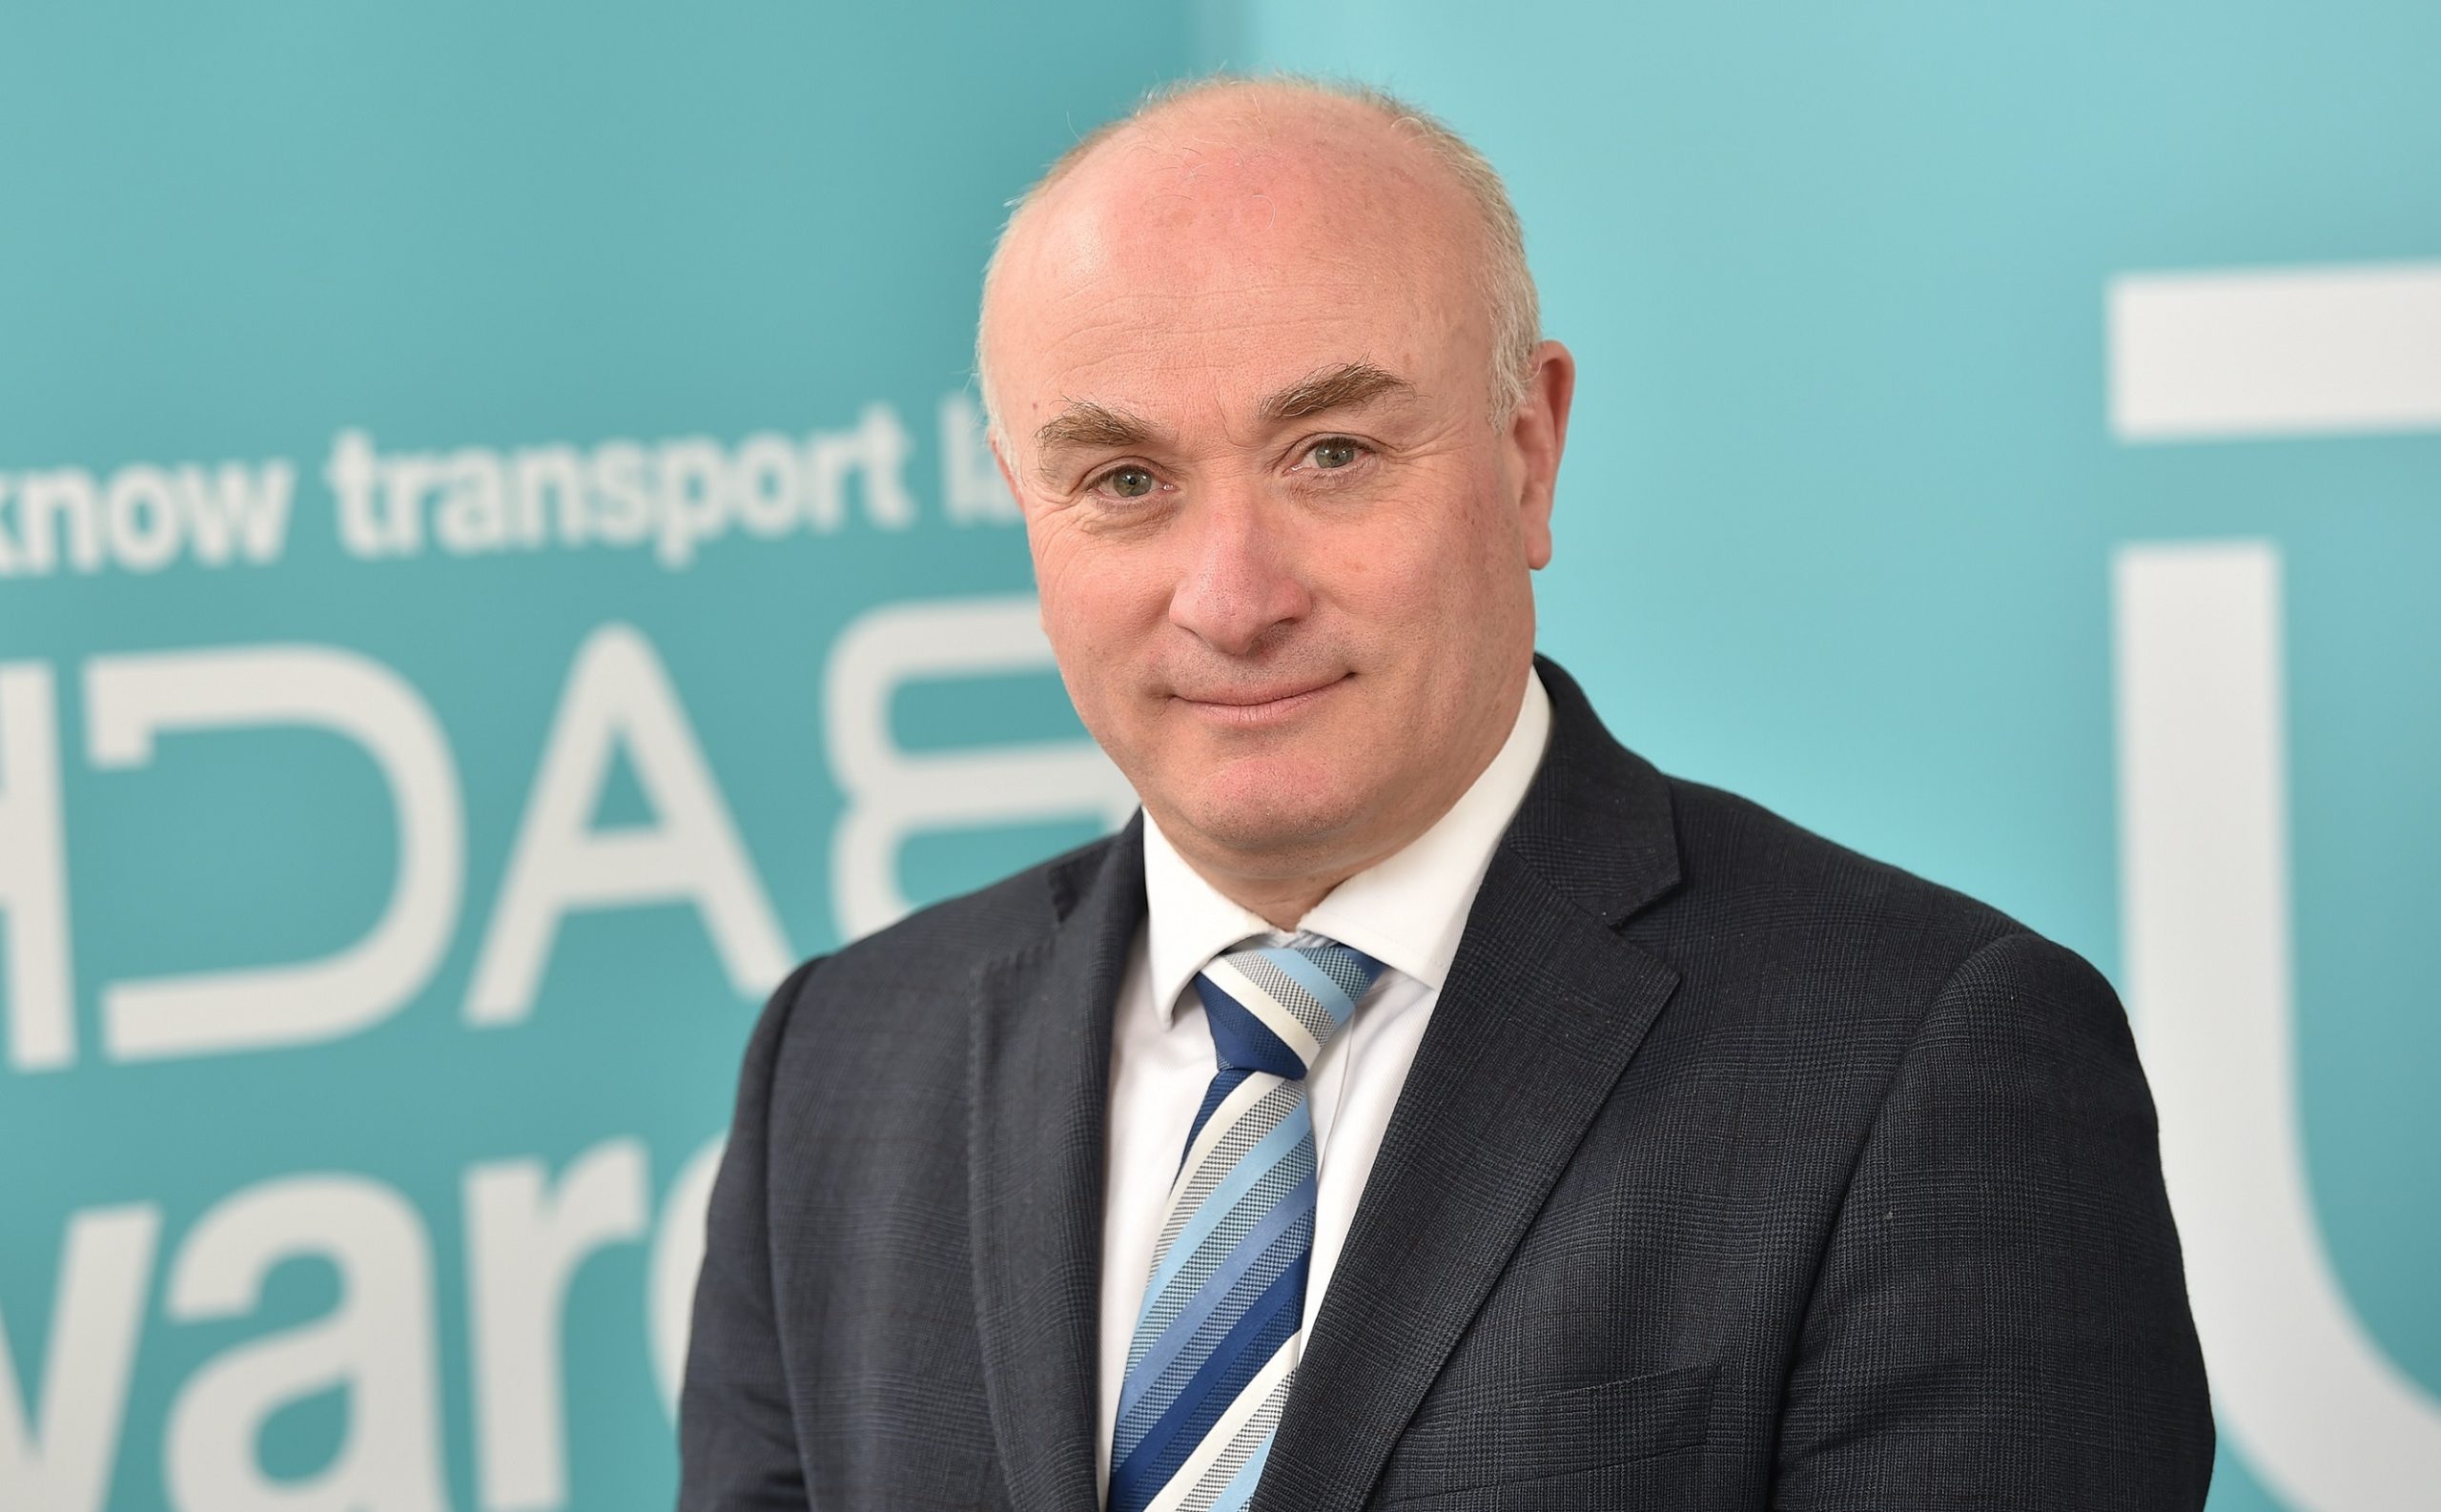 Bus Open Data Service considered by James Backhouse